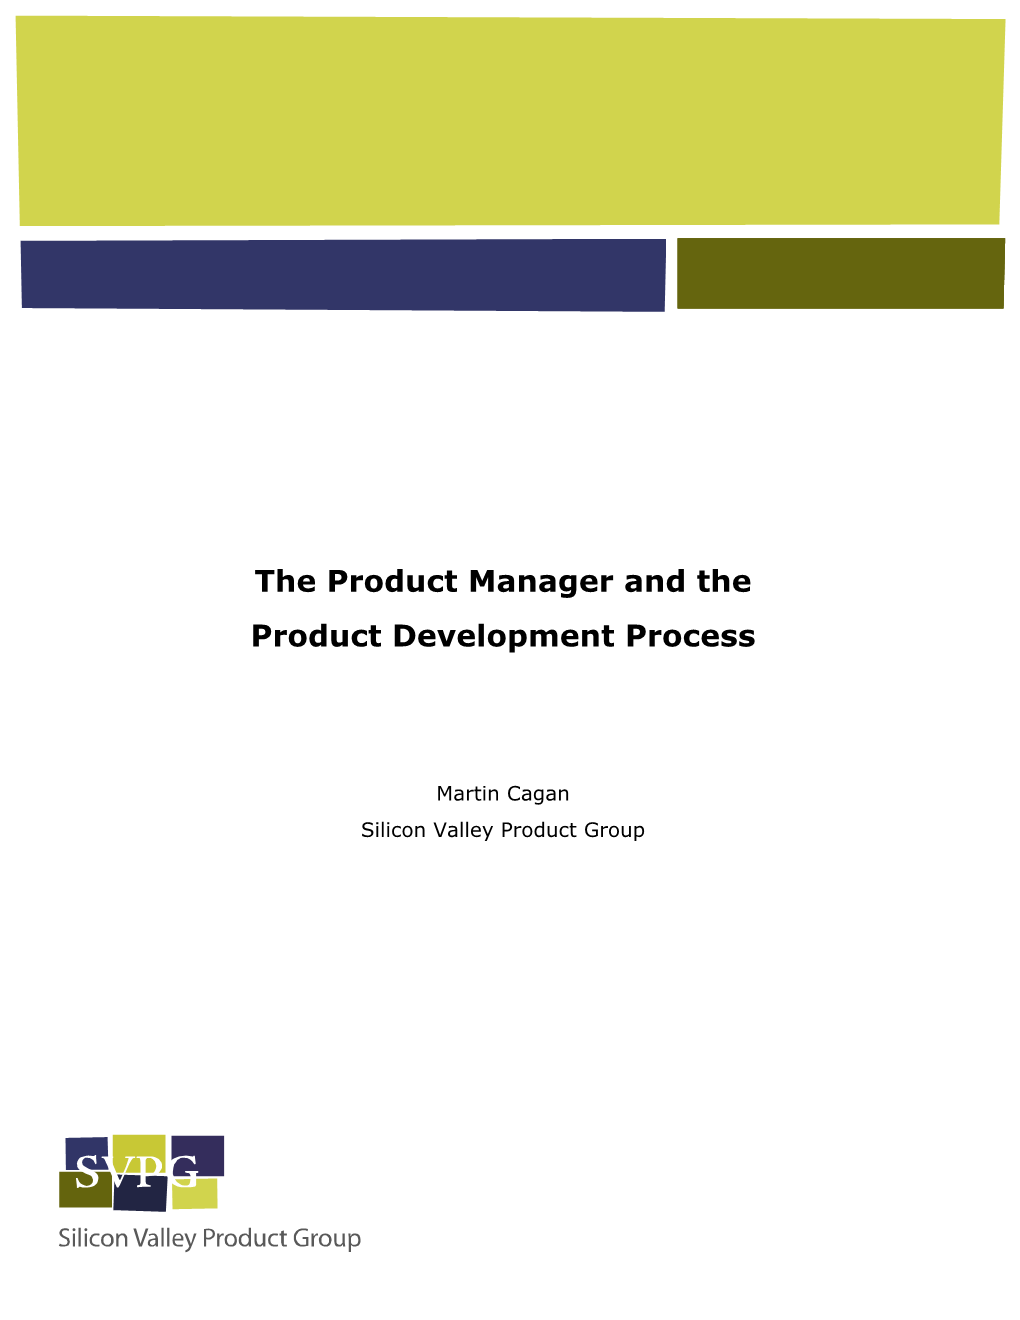 The Product Manager and the Product Development Process